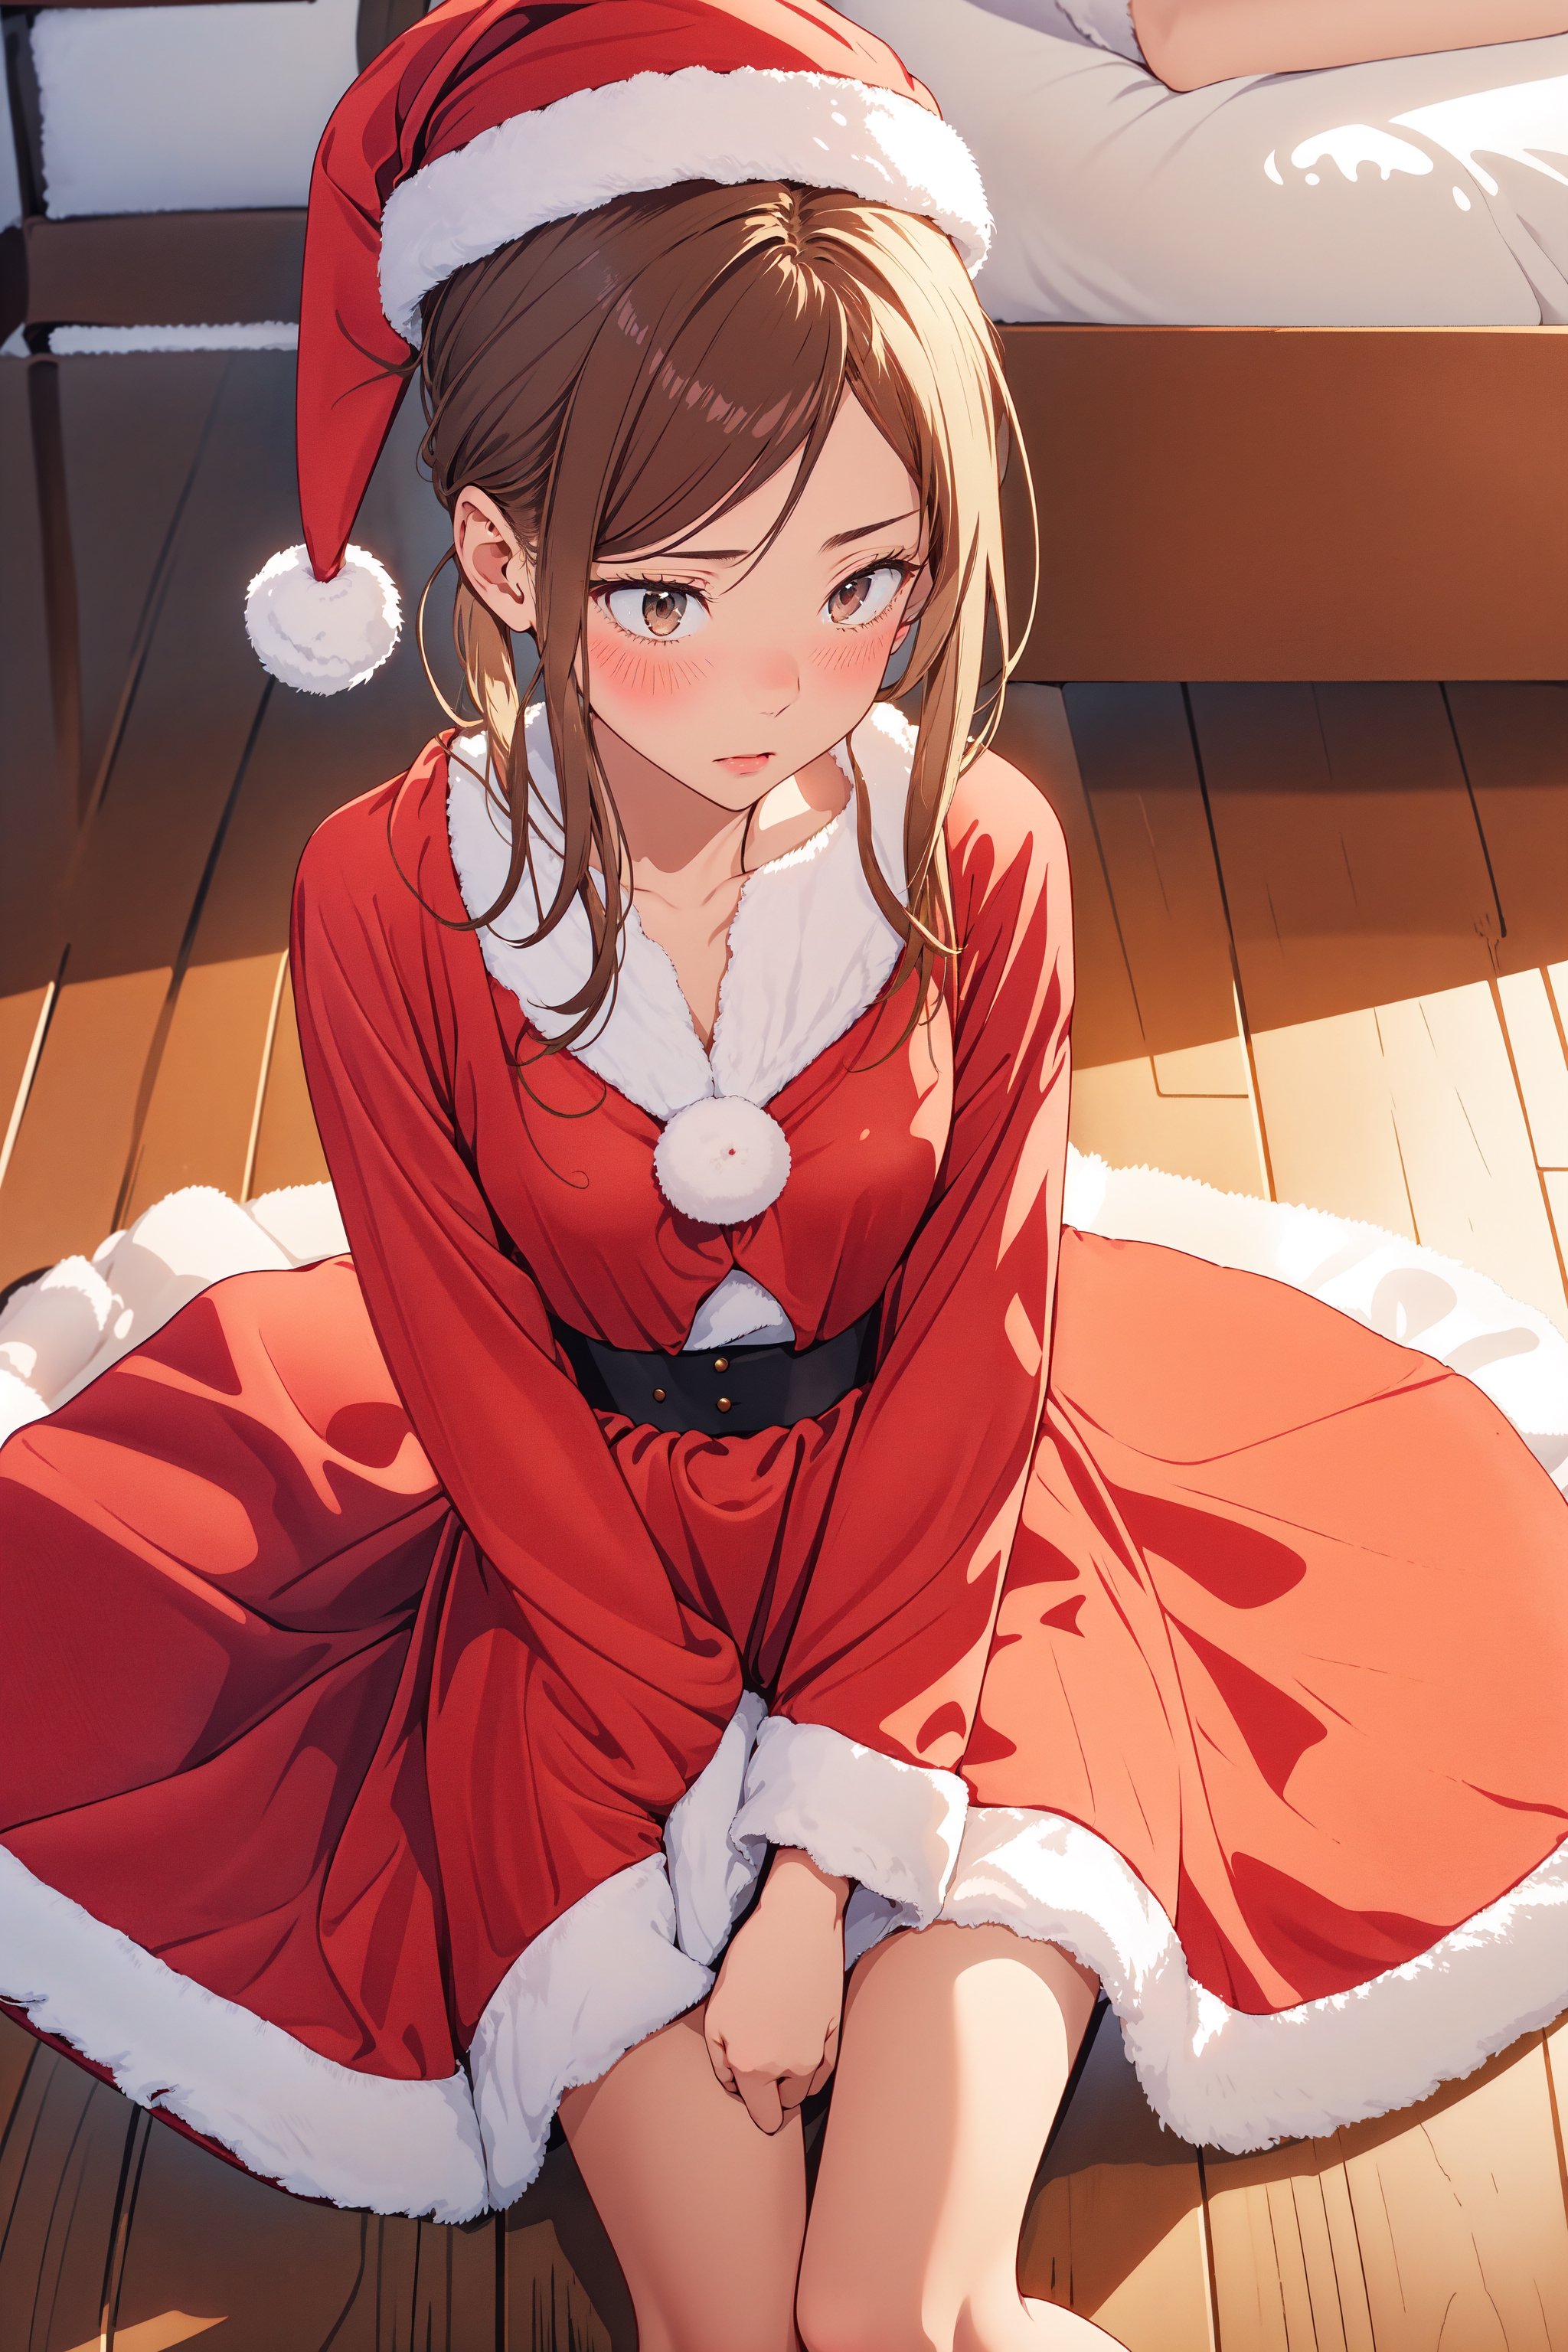 1 girl, alone, look away, shy, blushing, nervous, double pigtails, ((red dress with and a white Santa hat)), sit,kugisaki nobara